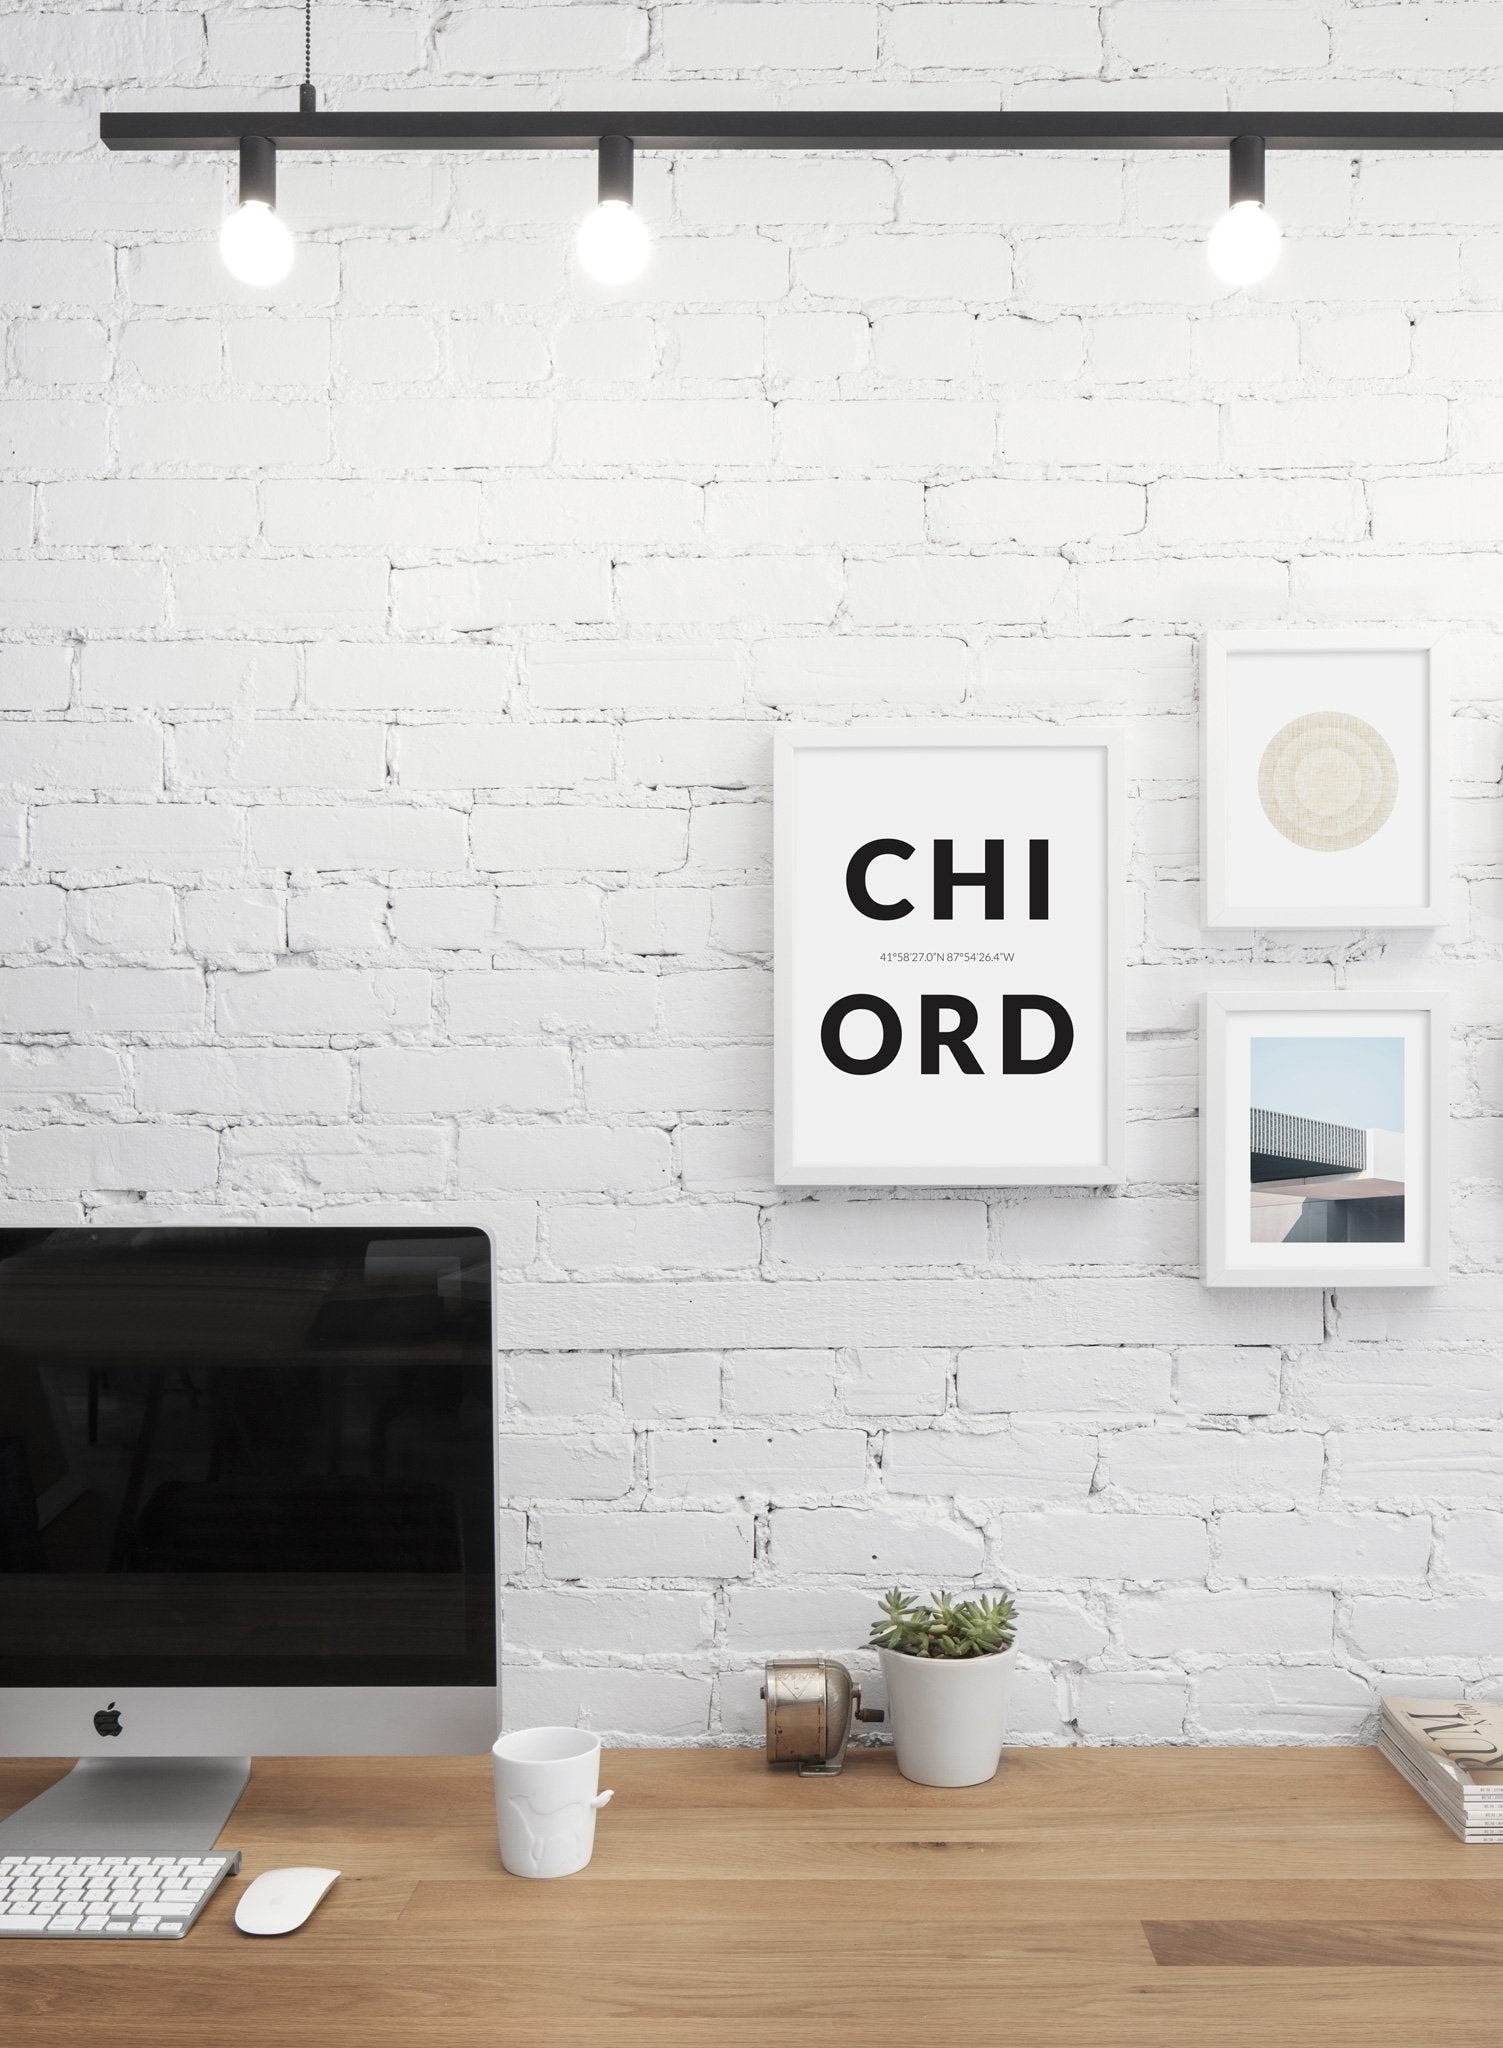 Destination: Chicago modern minimalist photography poster by Opposite Wall - Office Desk